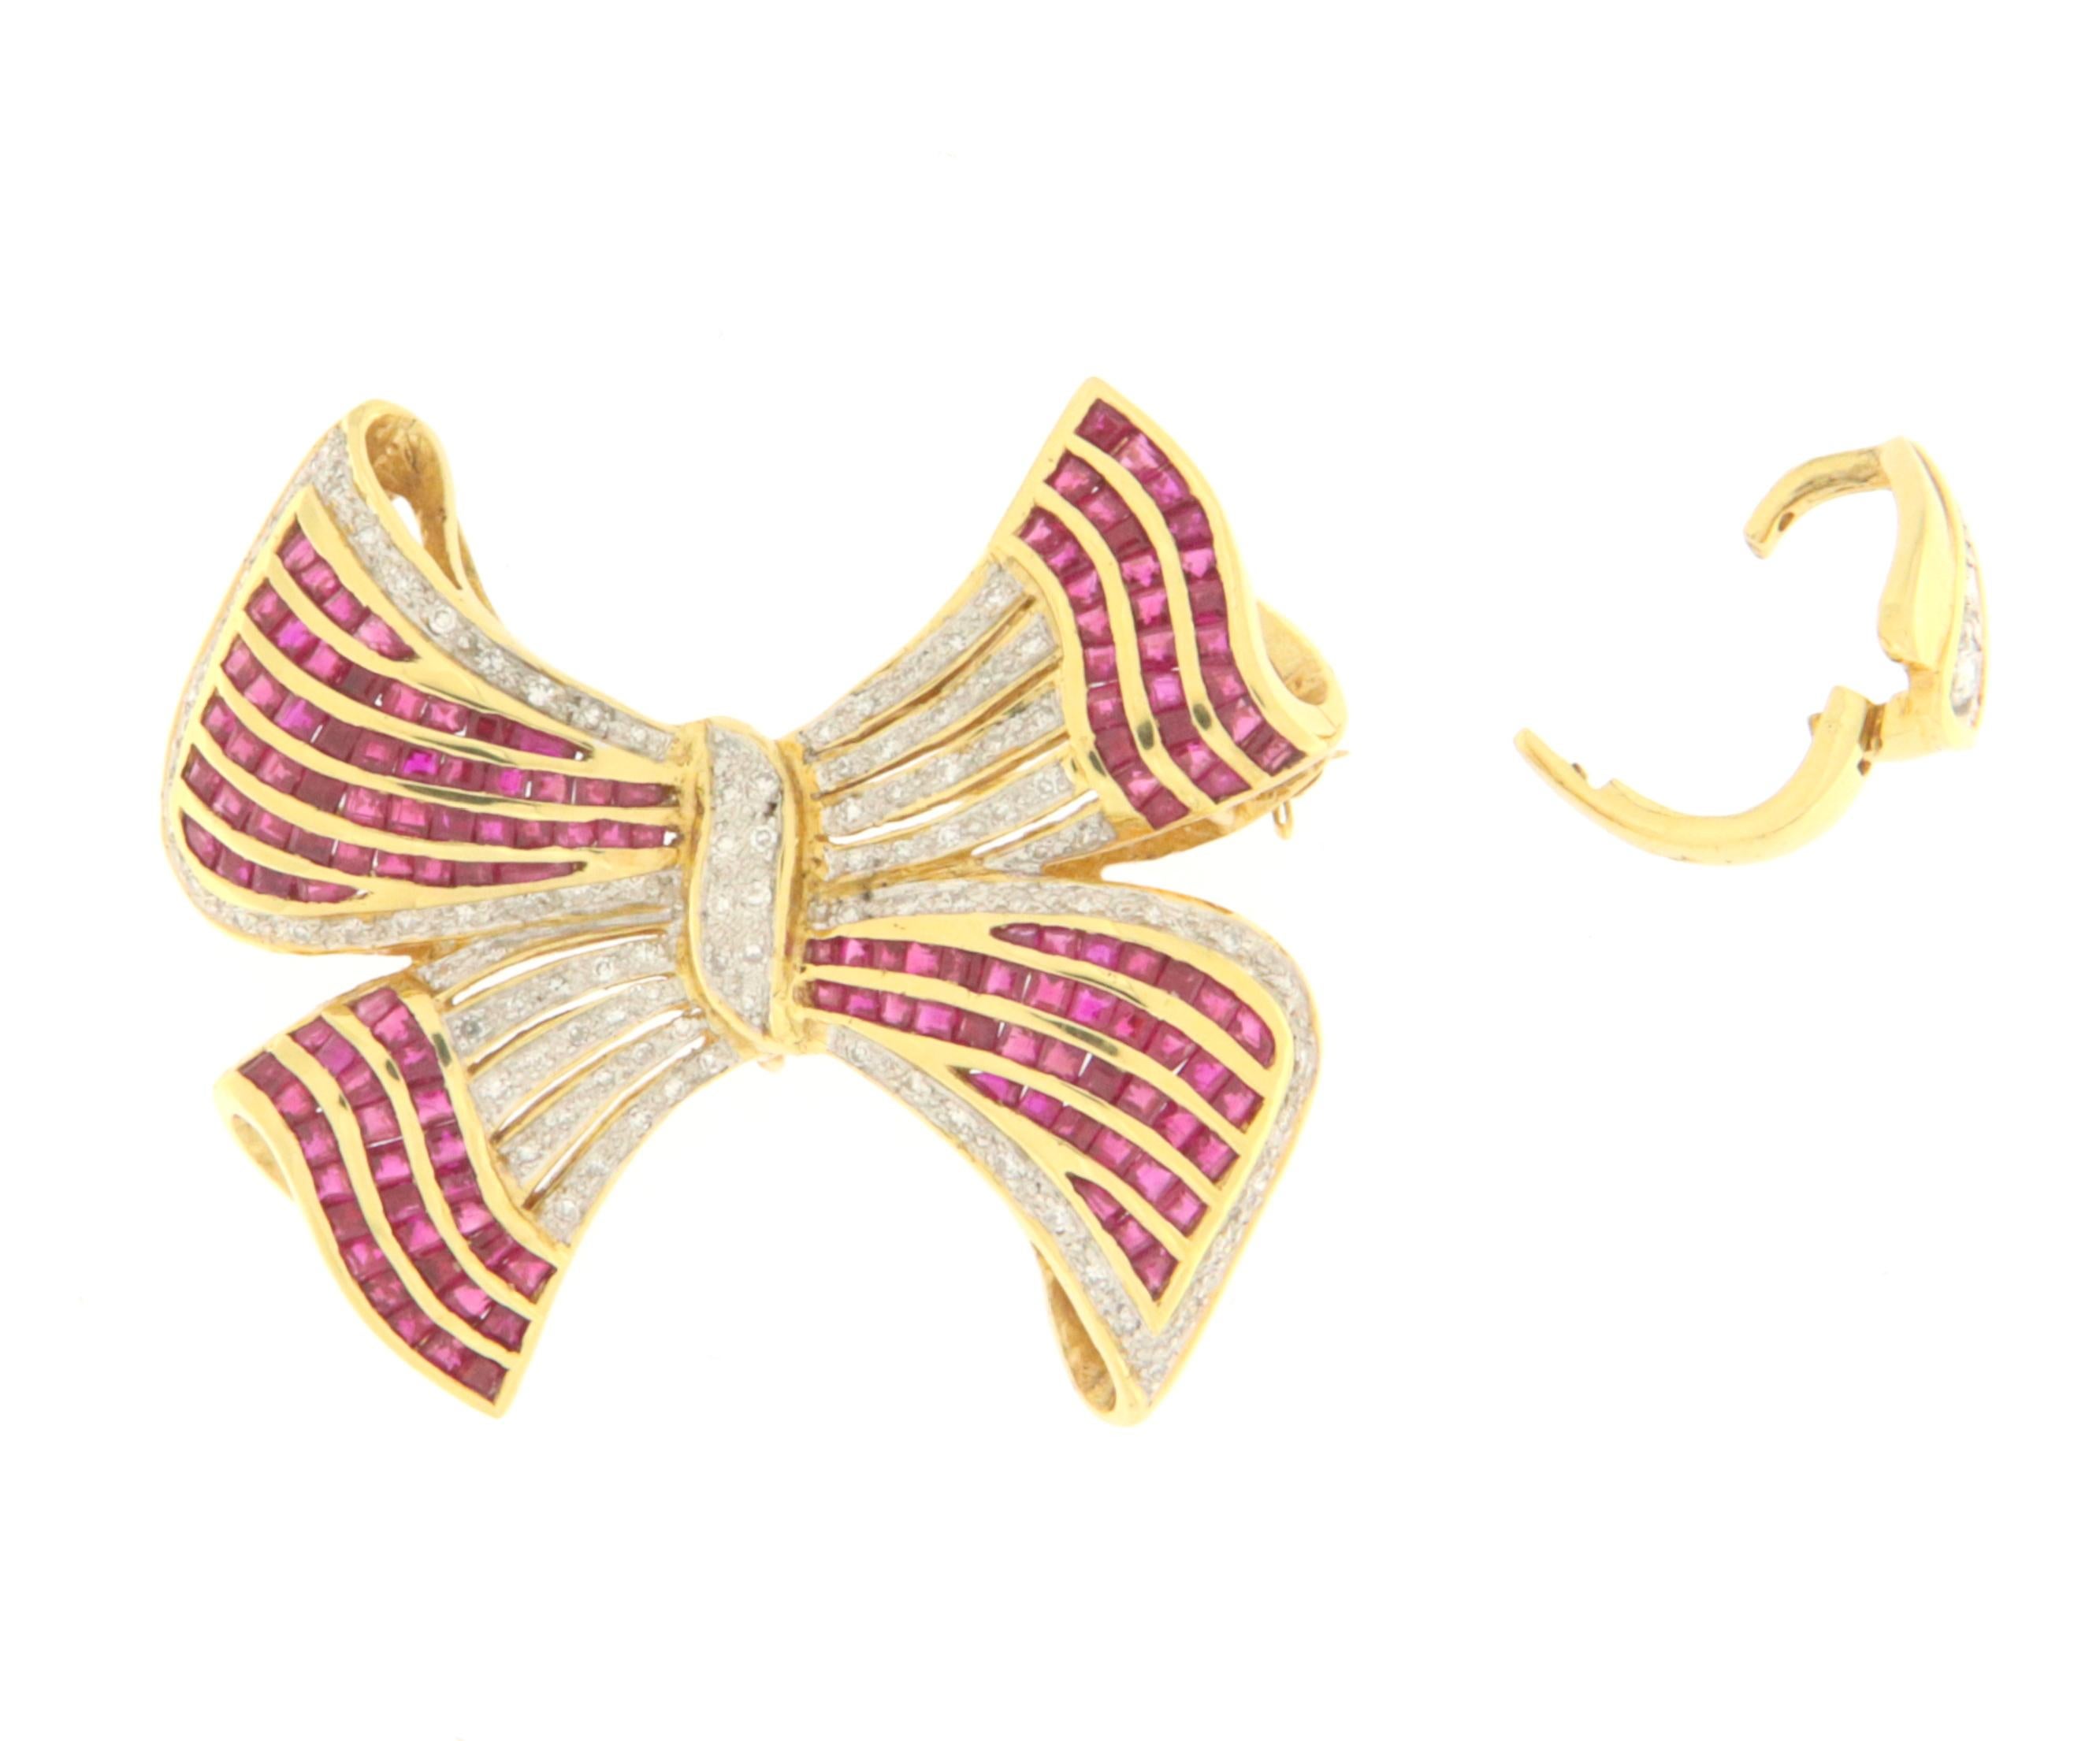 Brilliant Cut Diamonds Rubies 18 Karat Yellow Gold Bow Brooch and Pendant For Sale